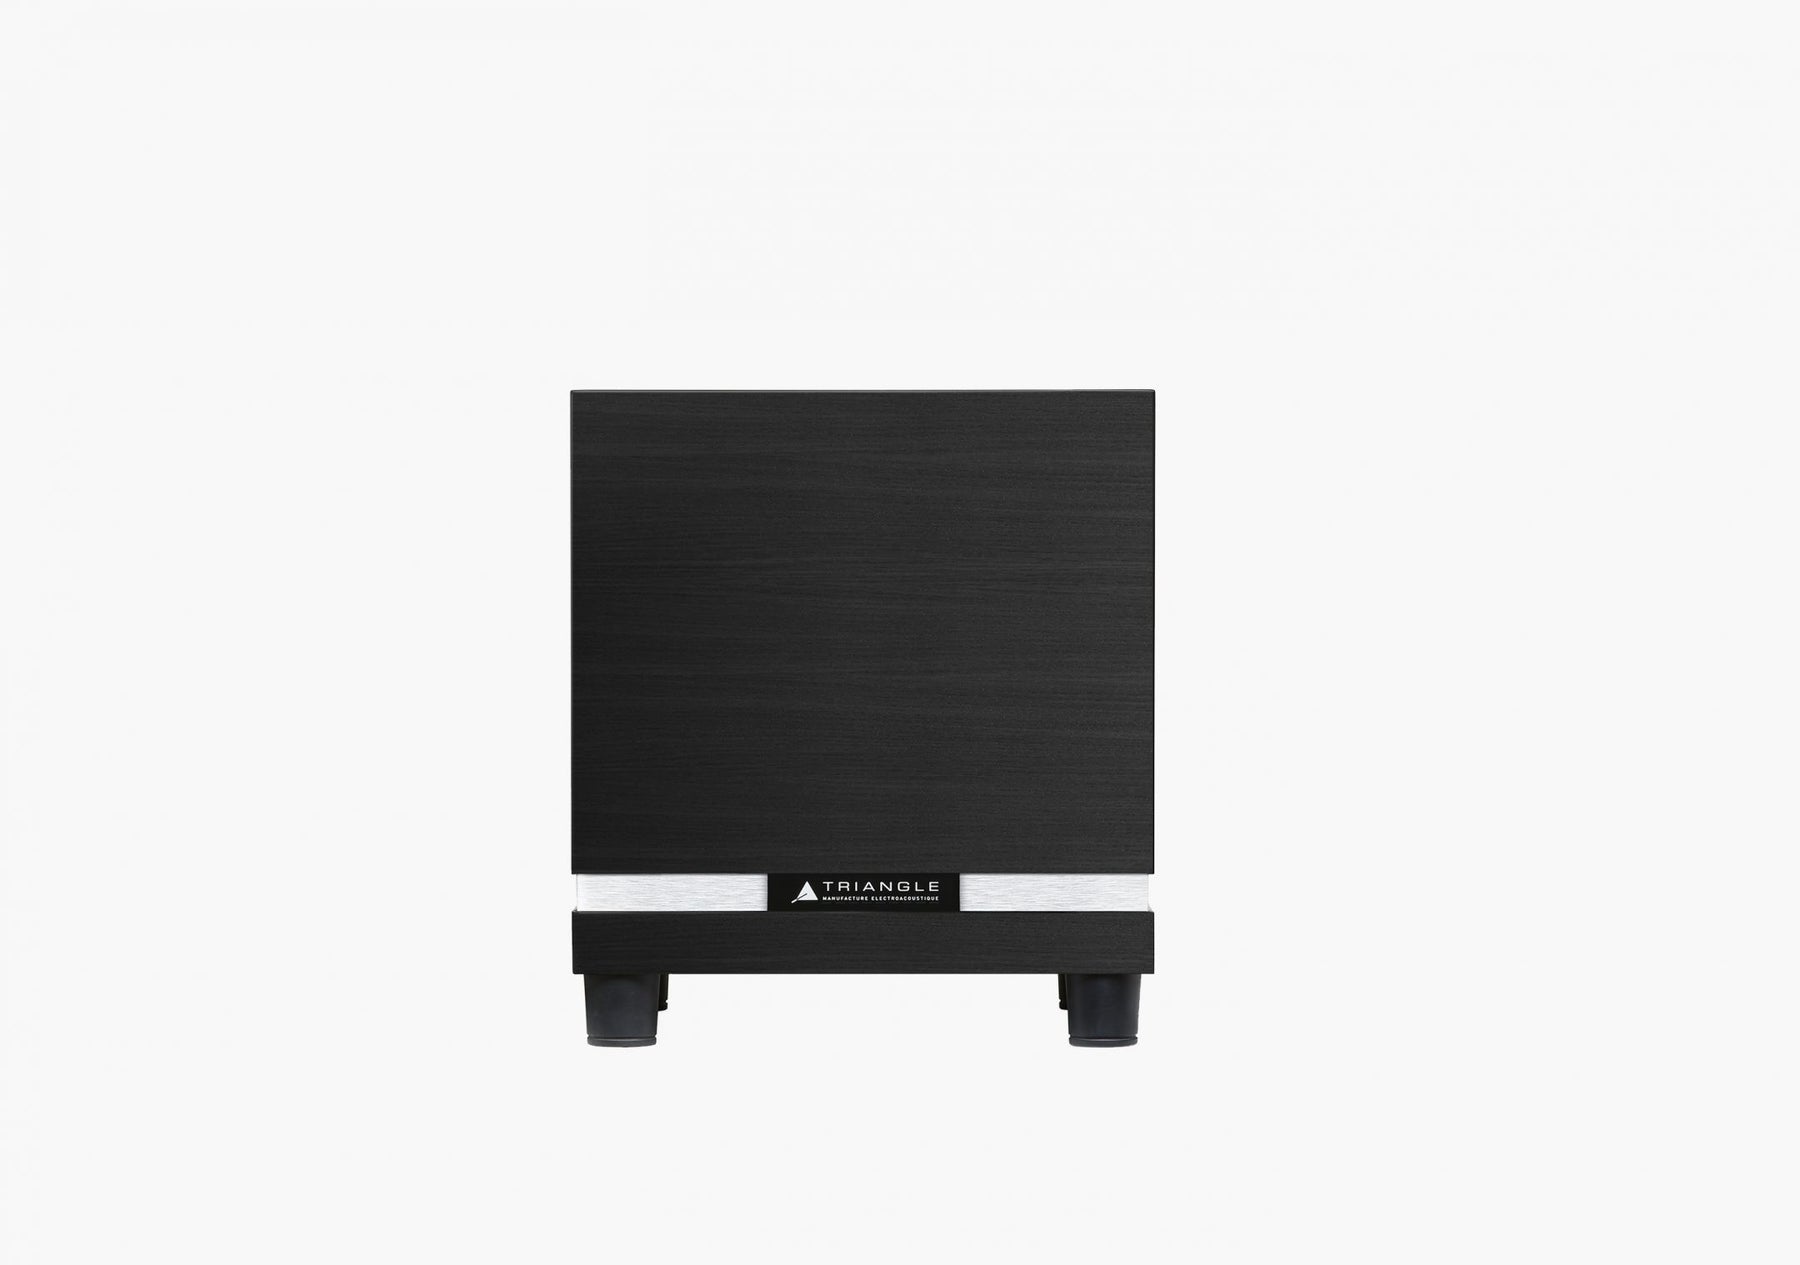 Triangle Thetis 300 - Subwoofer